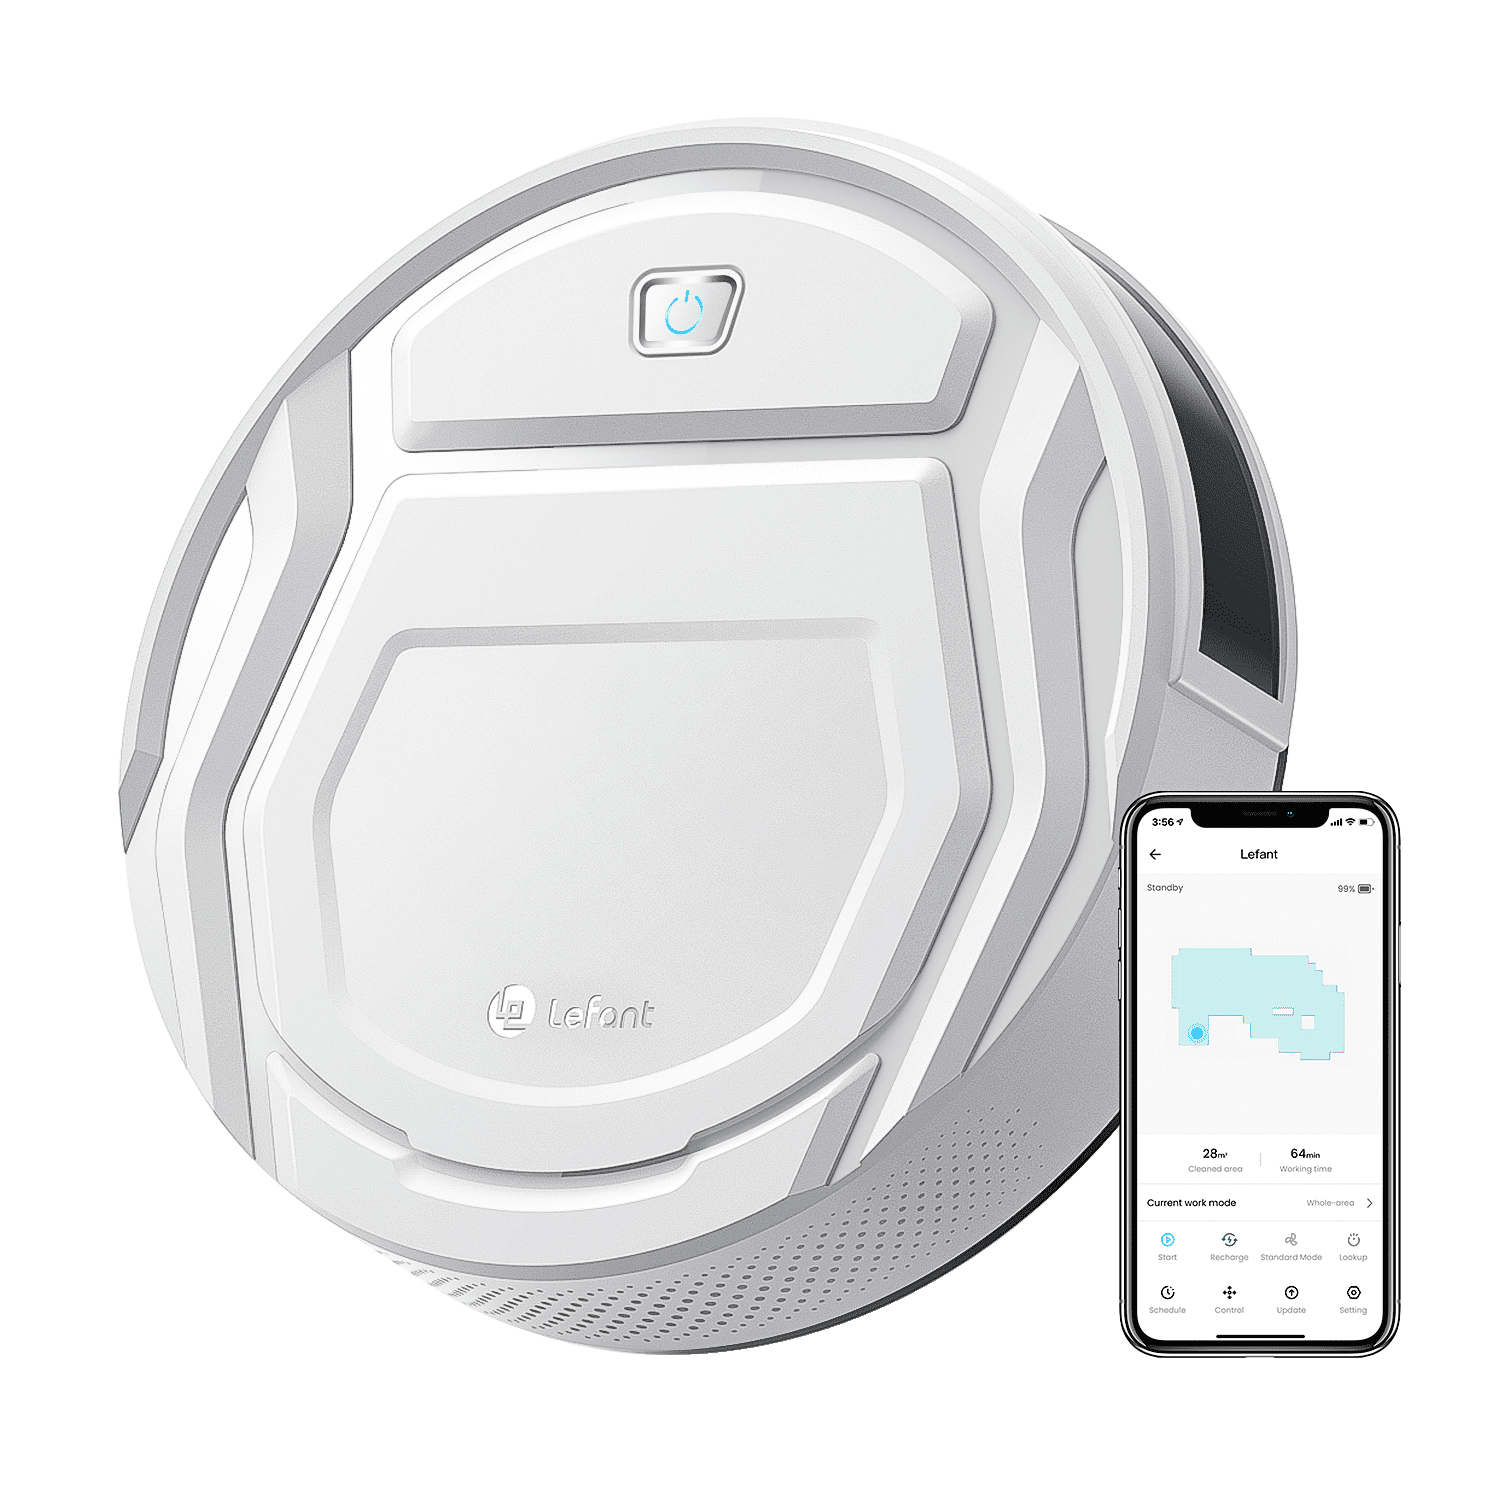 Lefant Robot Vacuum Cleaner, Ideal for Pet Hair Hard Floor and Daily Cleaning, 